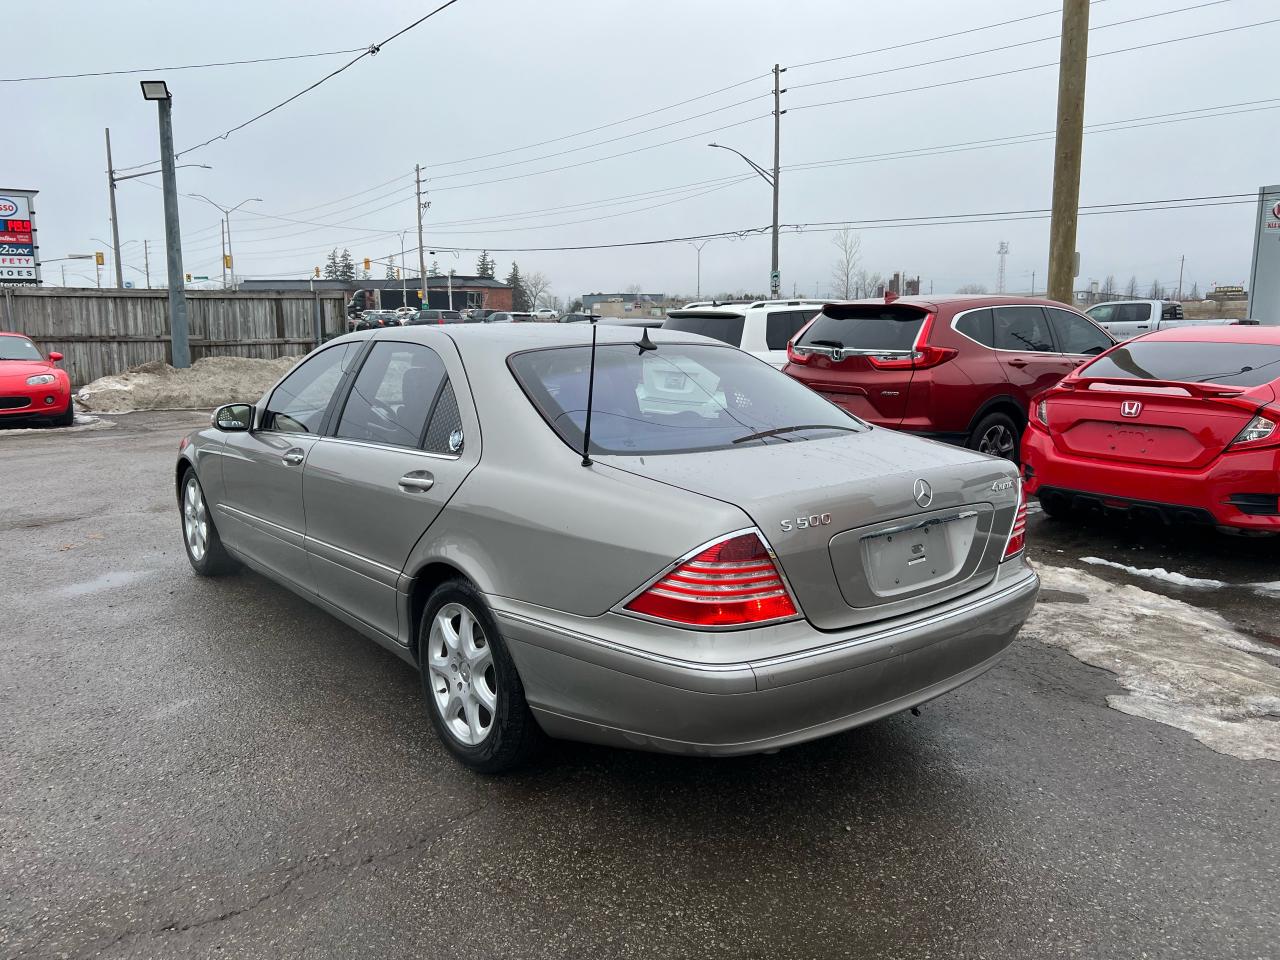 2005 Mercedes-Benz S-Class LWB*IMMACULATE**MANY UPGRADES**4MATIC**CERTIFIED - Photo #3